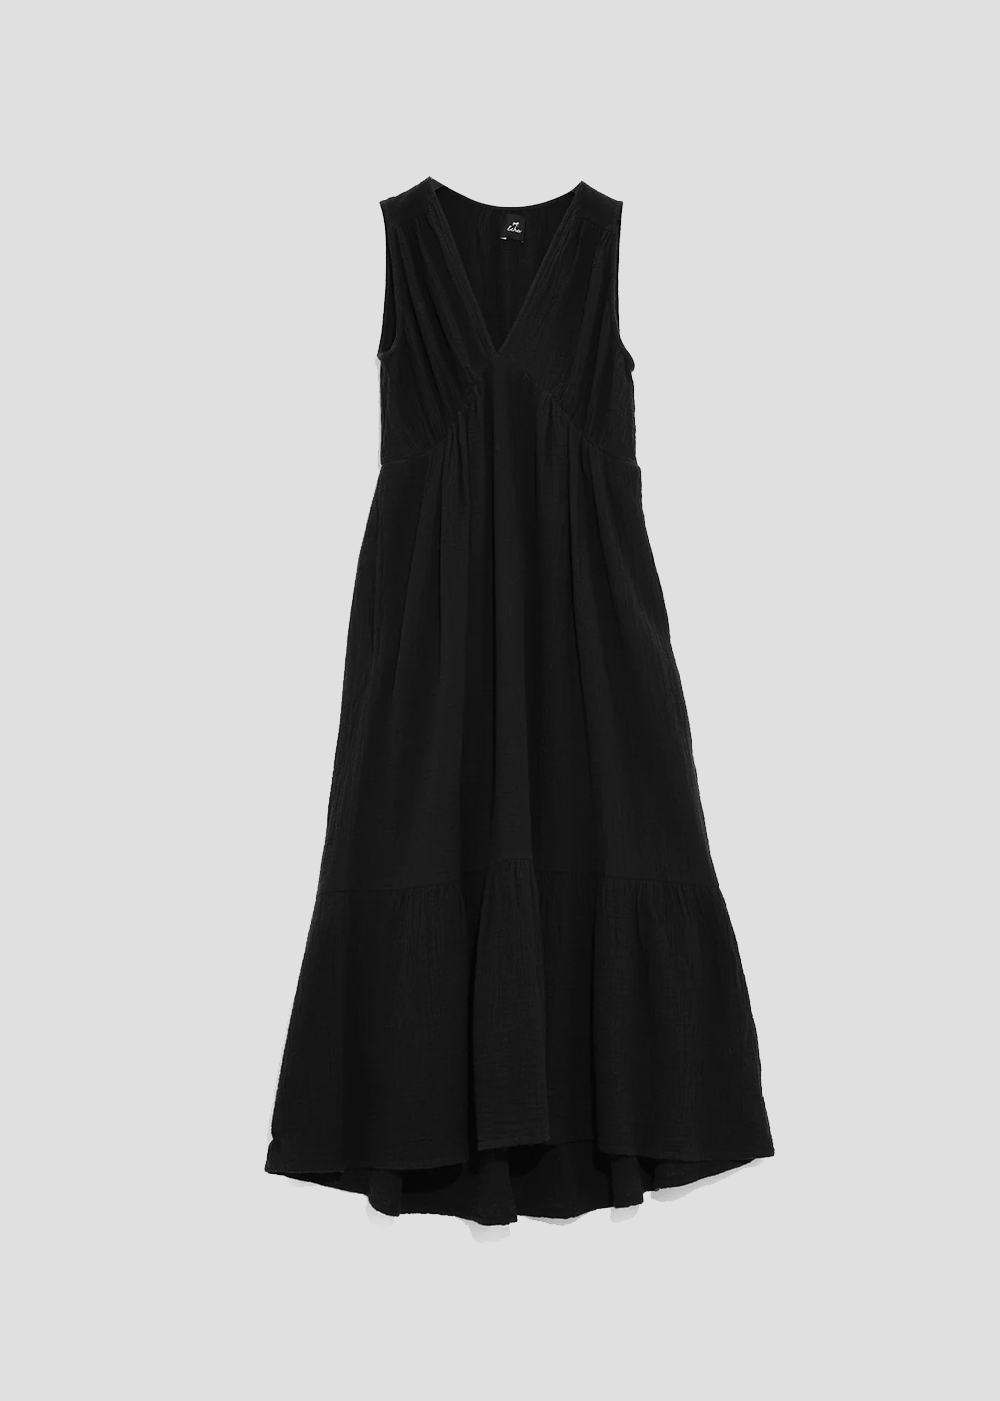 Front view of  sleeveless lightweight black maxi length summer dress from Echo New York. Fit is a modern relaxed silhouette and super soft 100% cotton.